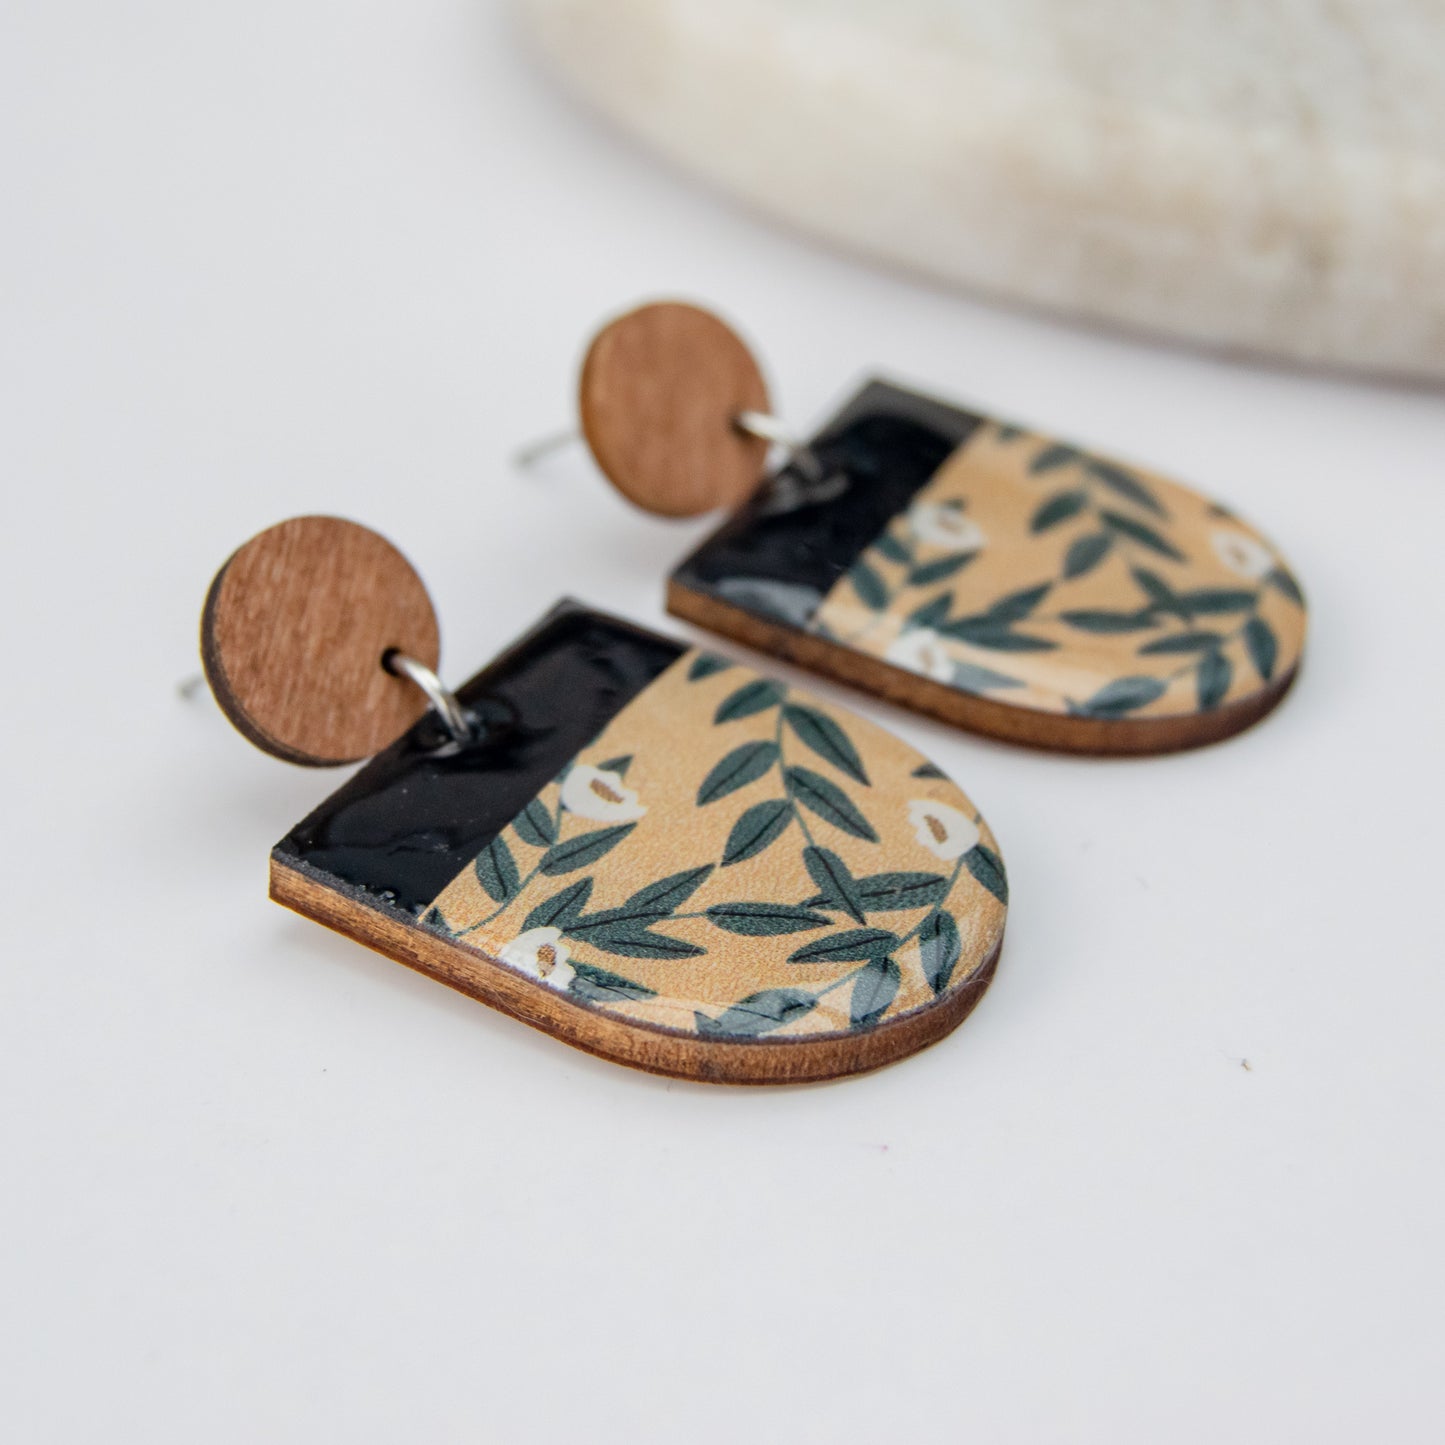 Lize - Wooden statement earrings in natural colors with green leaves